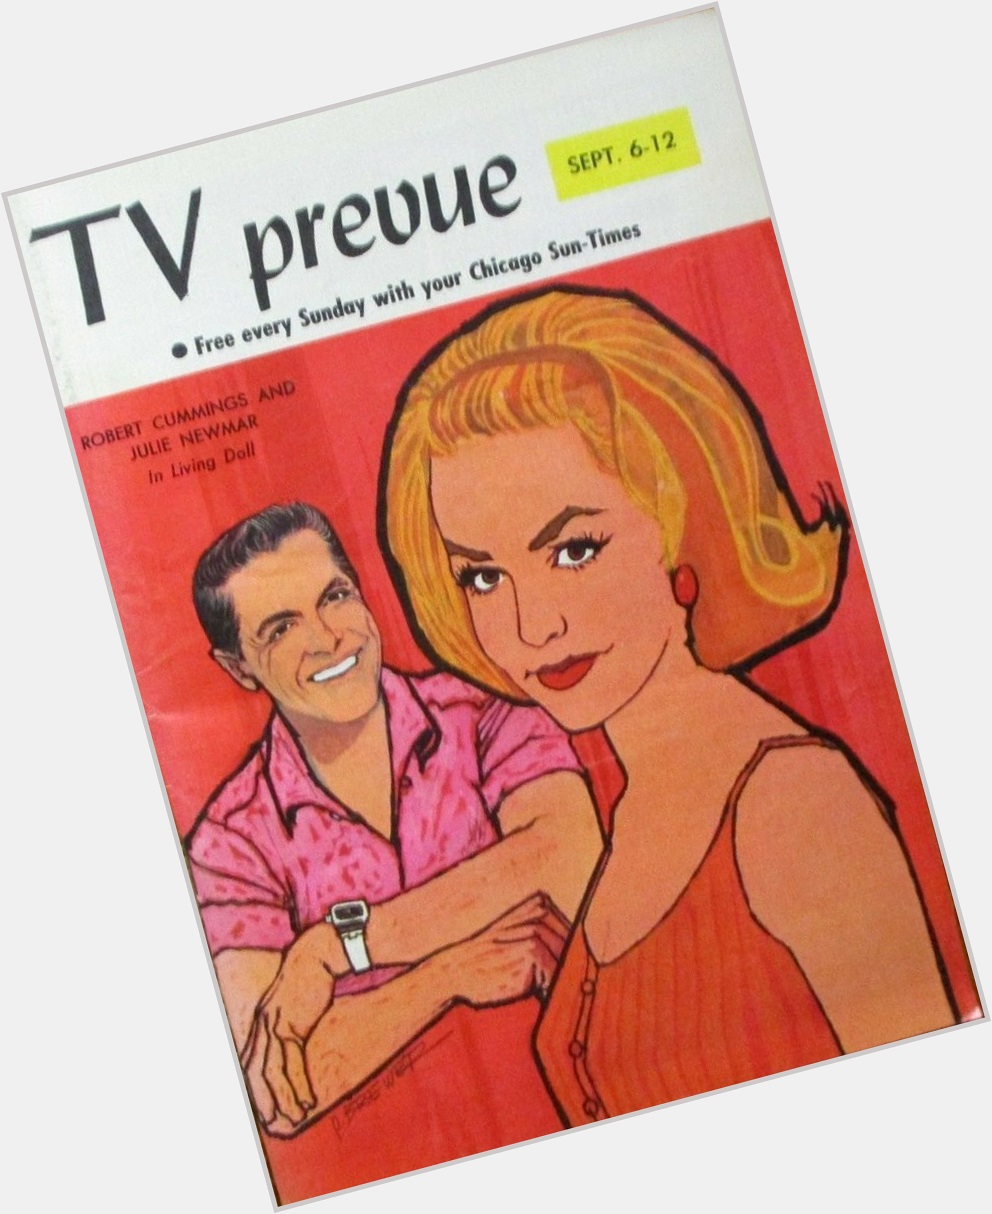 Happy Birthday to Julie Newmar, born on this date in 1933.
Chicago Sun-Times TV Prevue.  September 6-12, 1964 